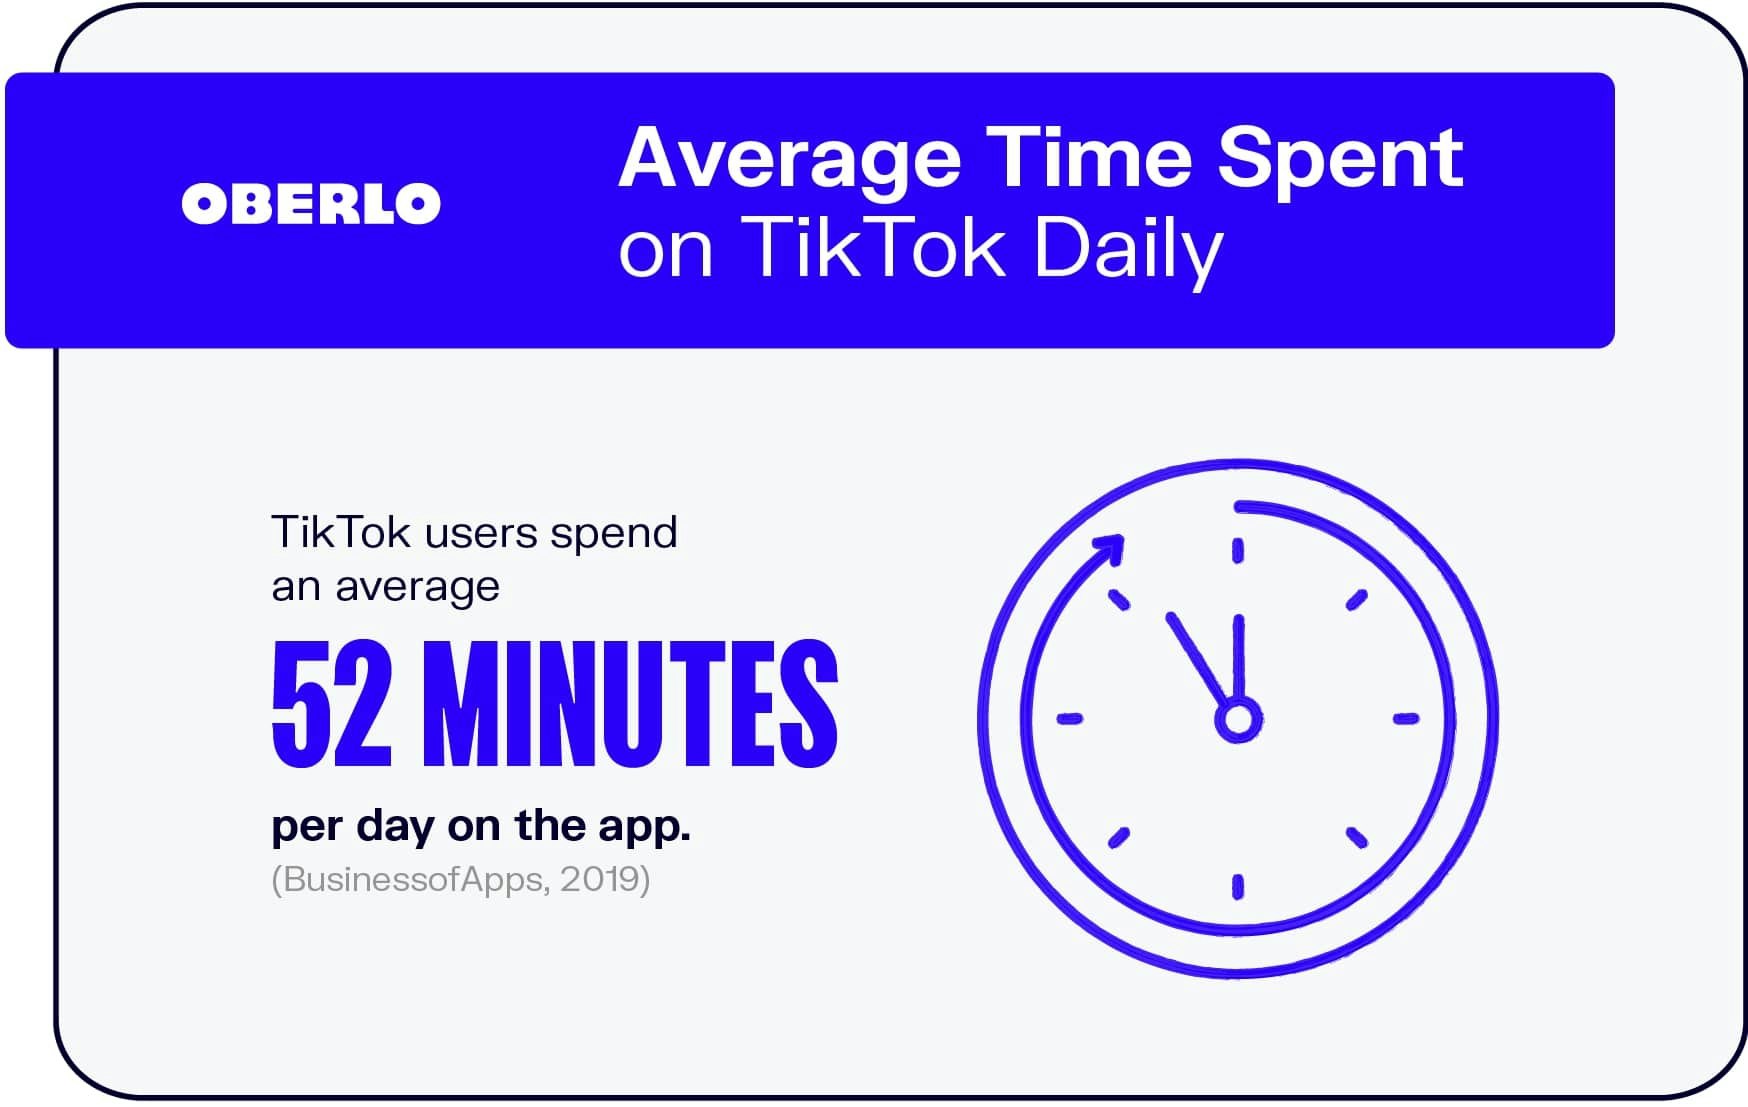 How Much Time Do Users Spend on TikTok Daily on Average?